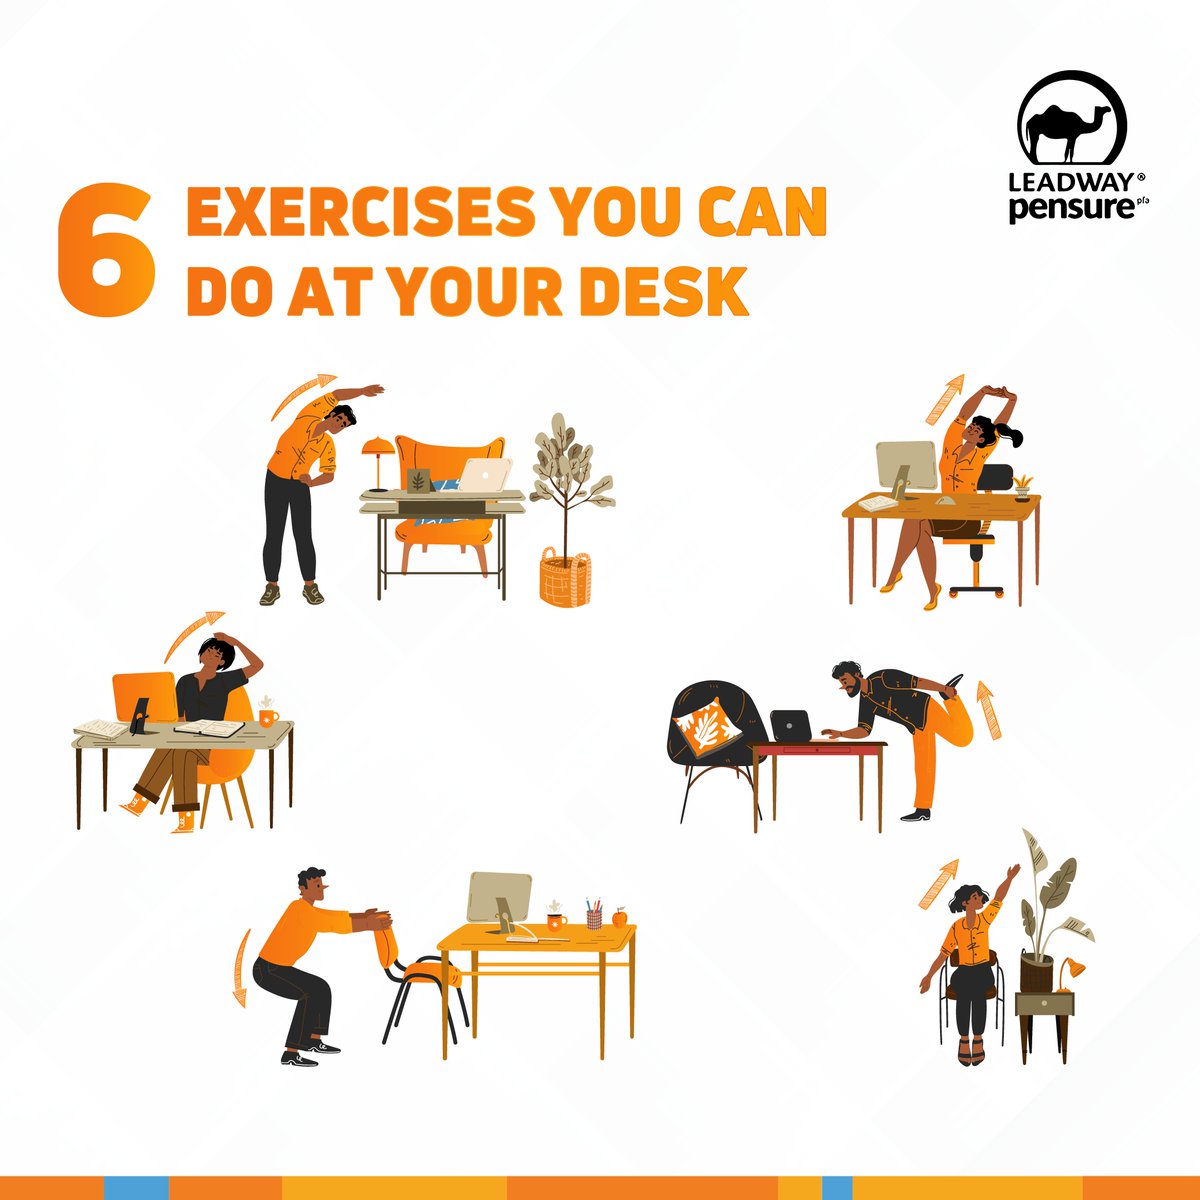 Living your best life starts with self-care. Try these exercises at your desk to rejuvenate your body and mind, boost productivity, and thrive at work.

Happy New Week!

 #SelfCare #Liveyourbestlife #LeadwayPensure #Leadway #DeskExercises